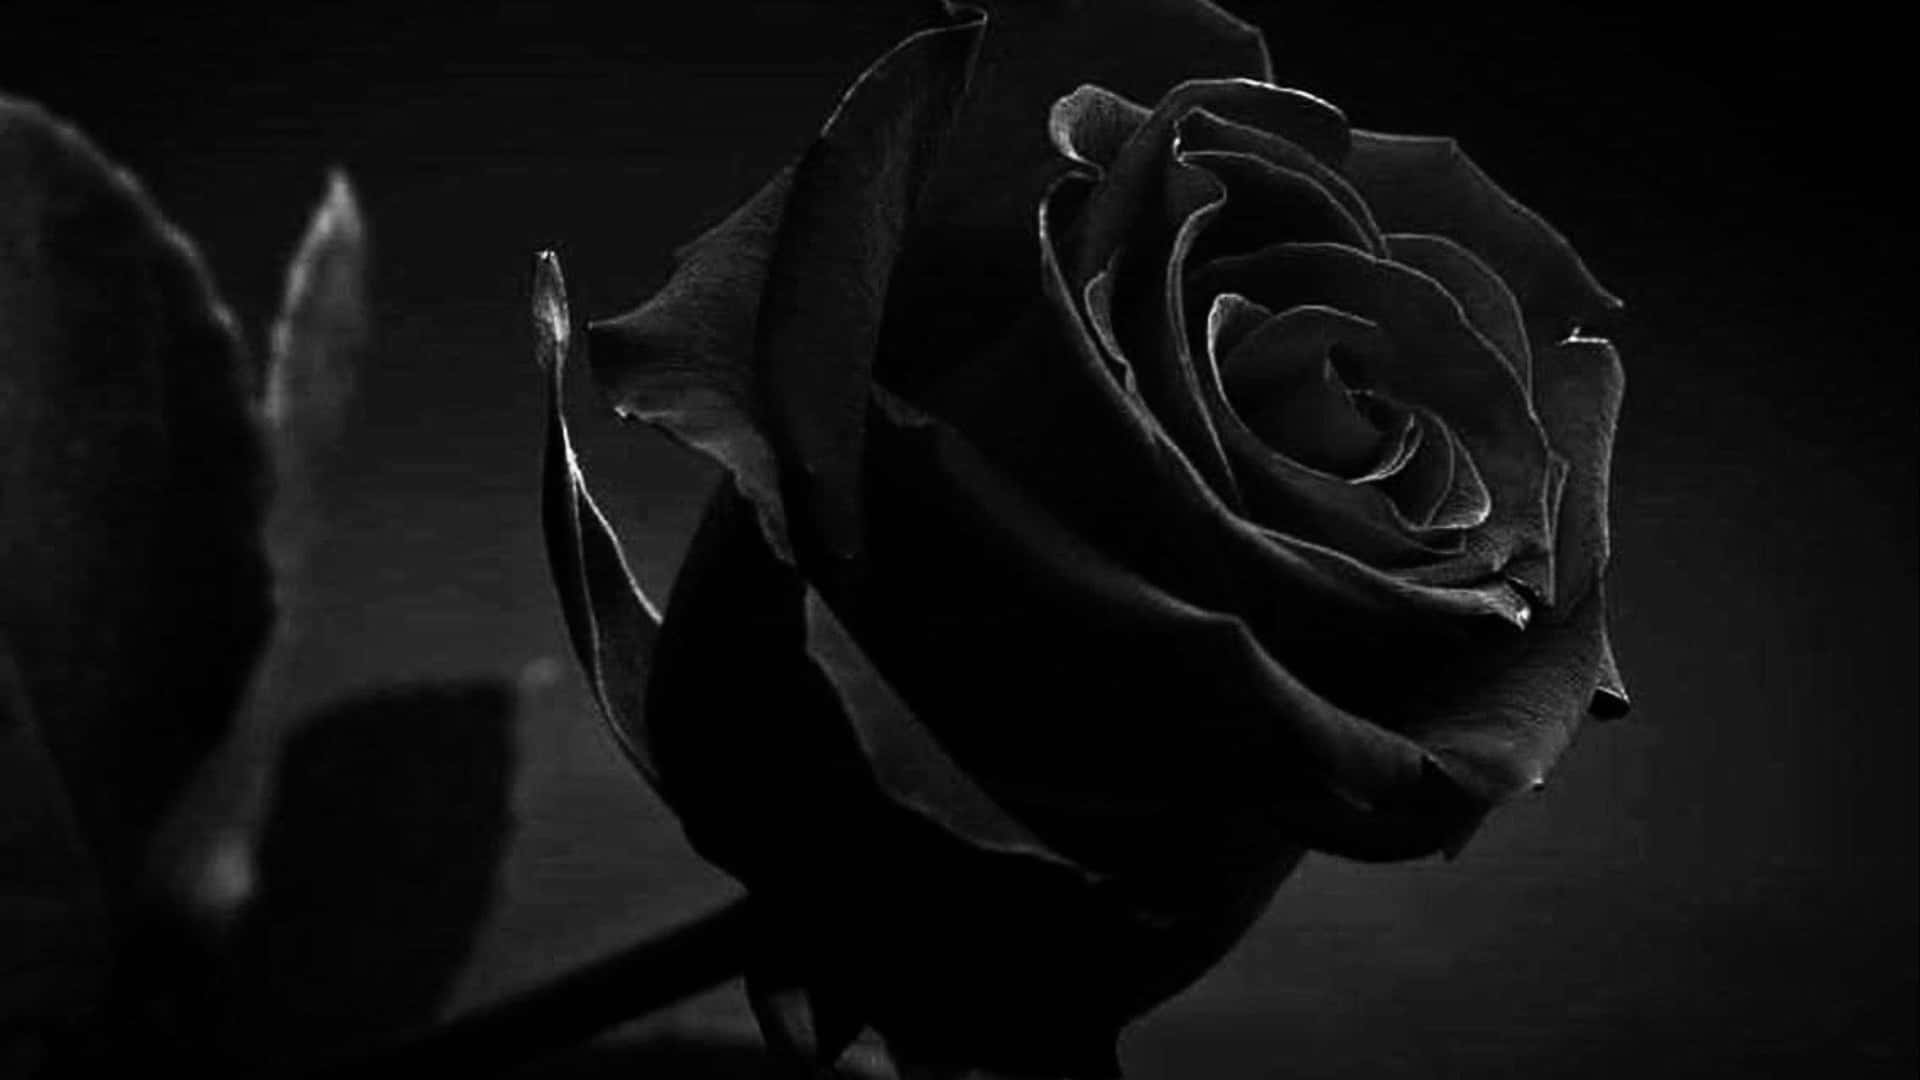 Evoking feelings of passion and mystery, this striking black rose symbolizes admiration and beauty.